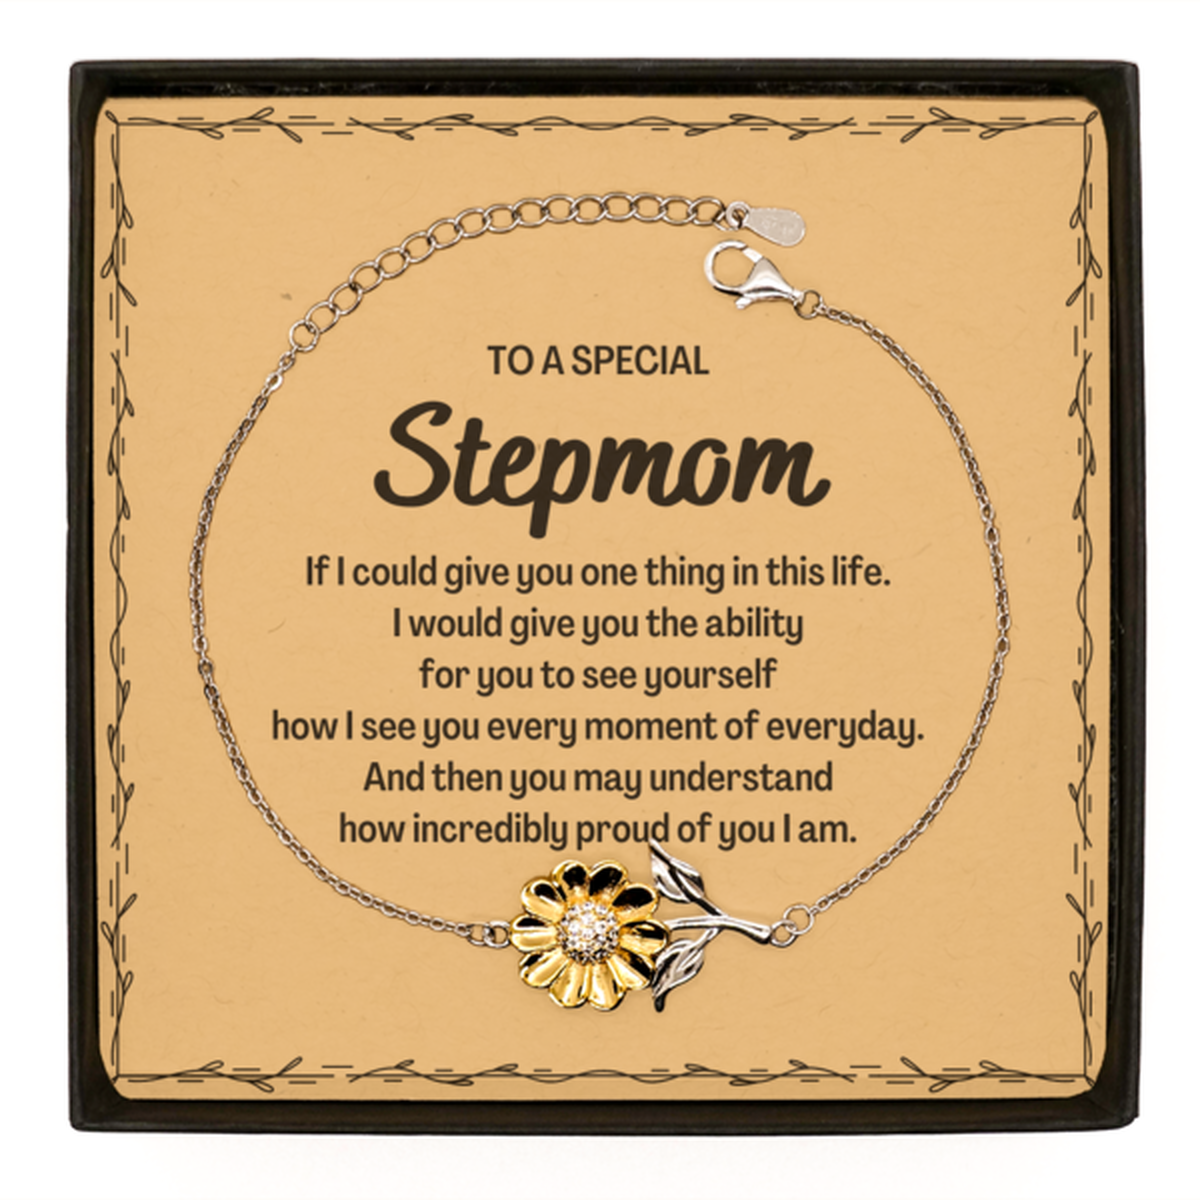 To My Stepmom Sunflower Bracelet, Gifts For Stepmom Message Card, Inspirational Gifts for Christmas Birthday, Epic Gifts for Stepmom To A Special Stepmom how incredibly proud of you I am